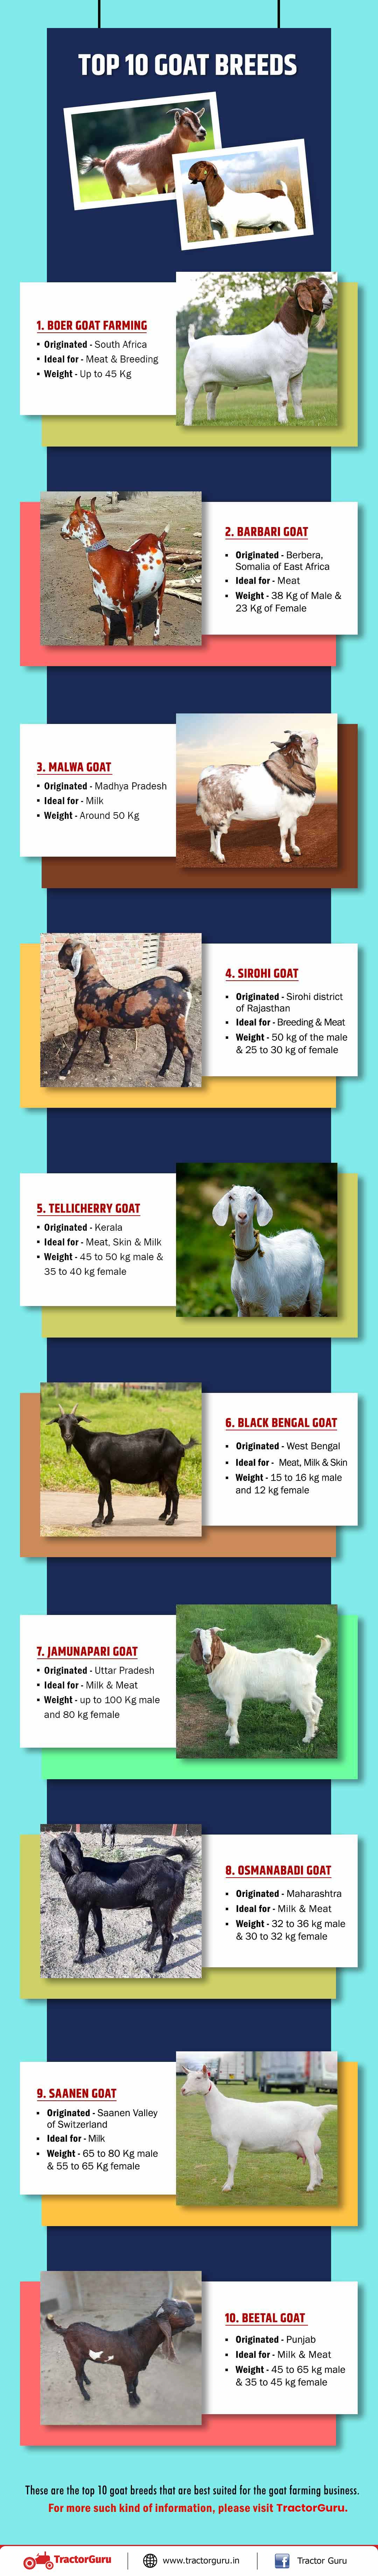 Top 10 Goat Breed Infographic 2022